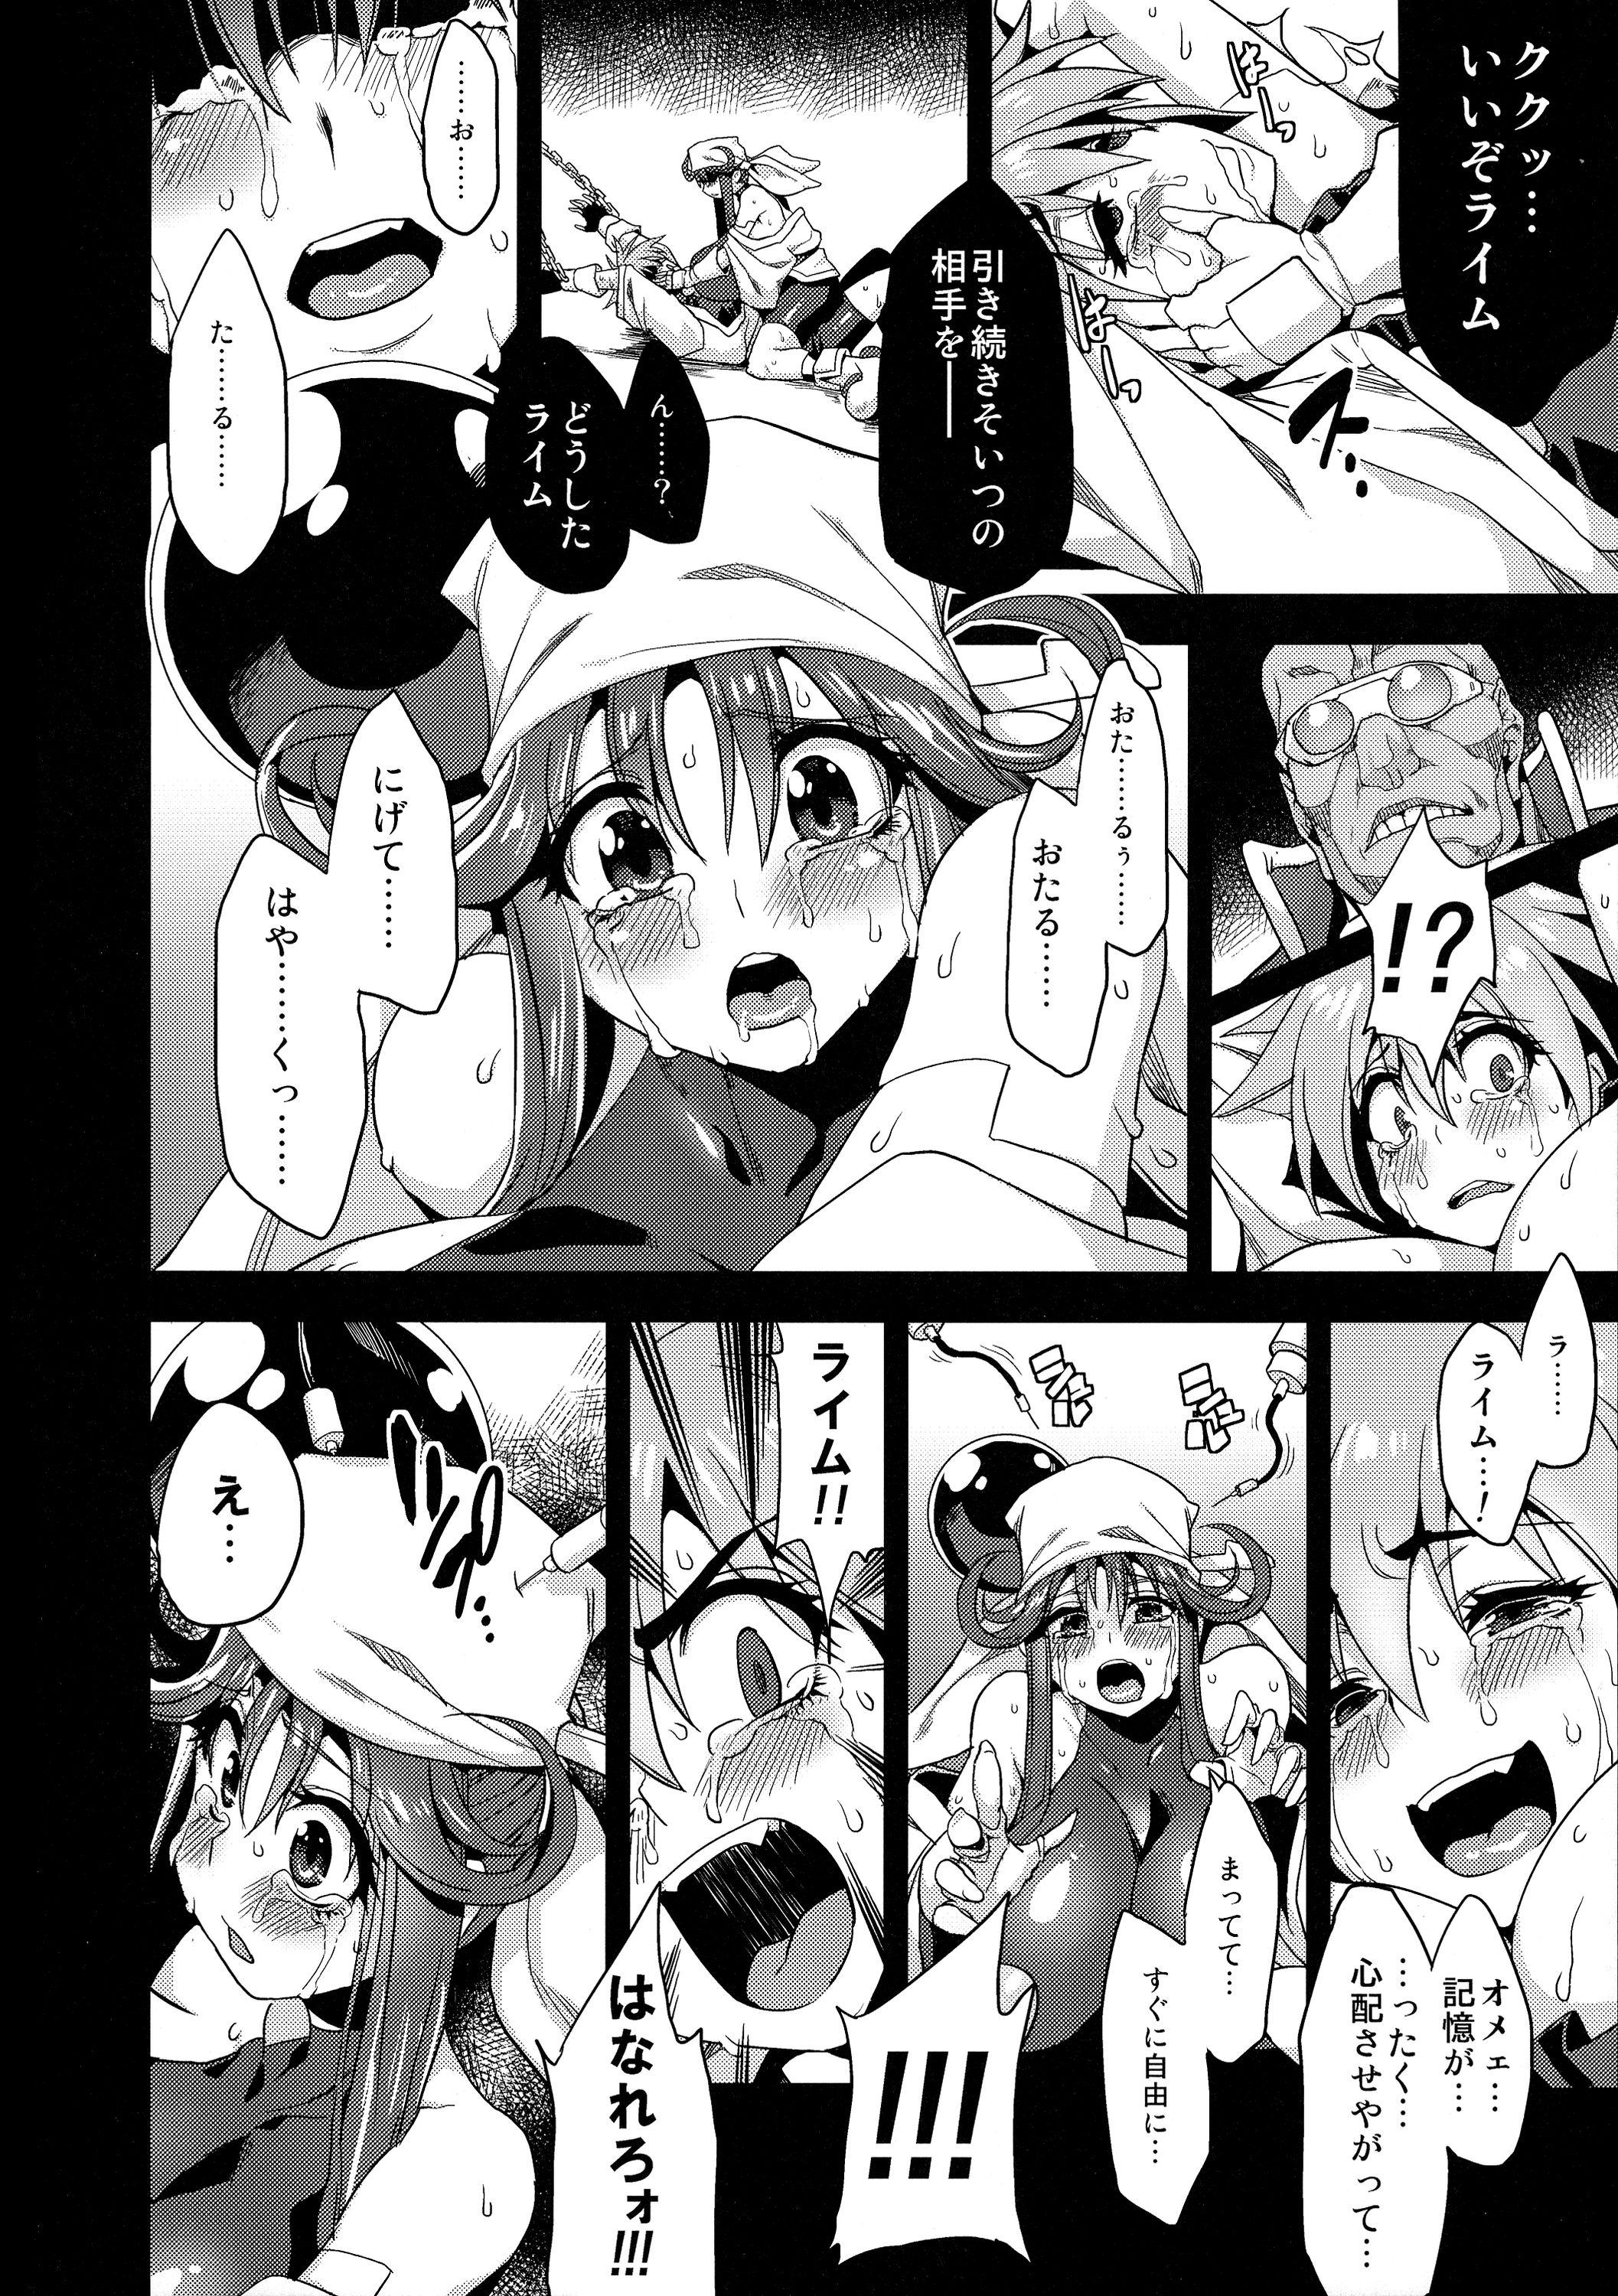 Rough Sex Hentai Marionette 3 - Saber marionette Mexico - Page 10